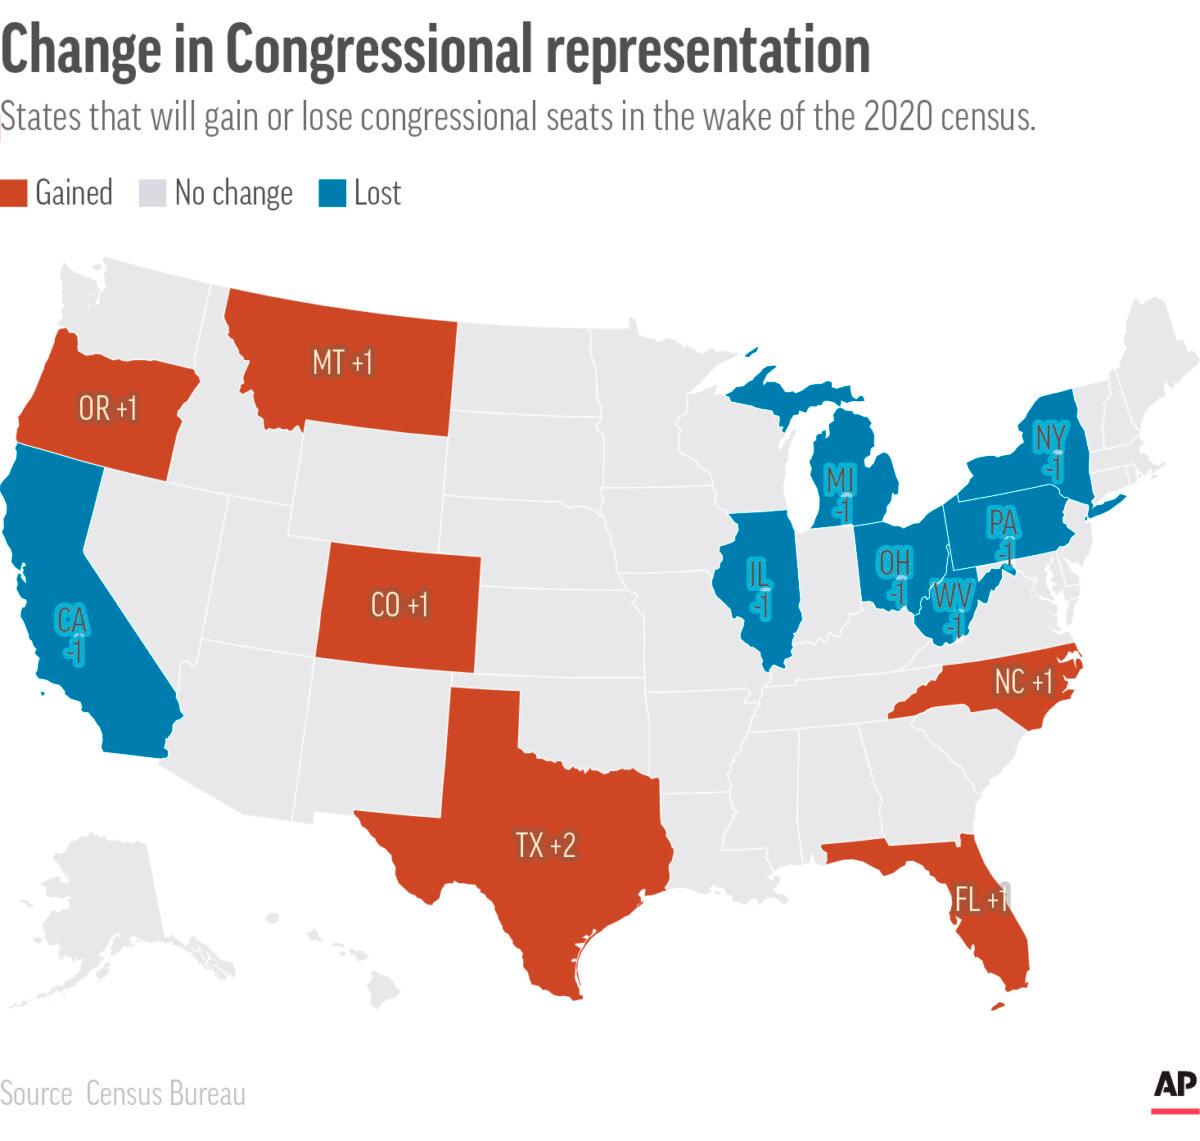 States that will gain or lose congressional seats in the wake of the 2020 census